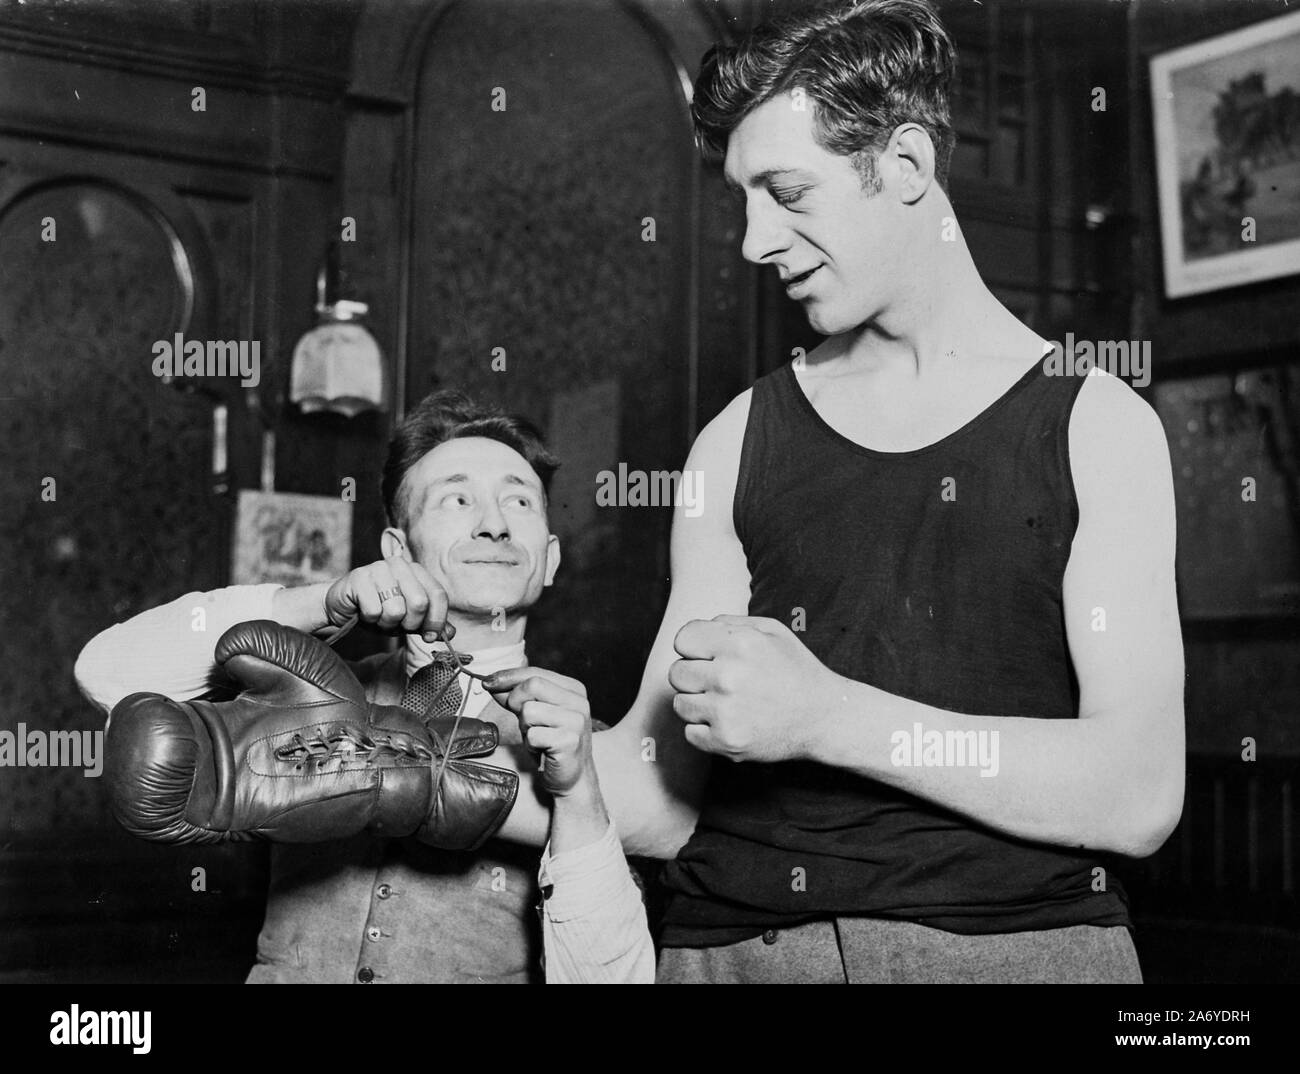 jim campbell, boxer, 40s Stock Photo